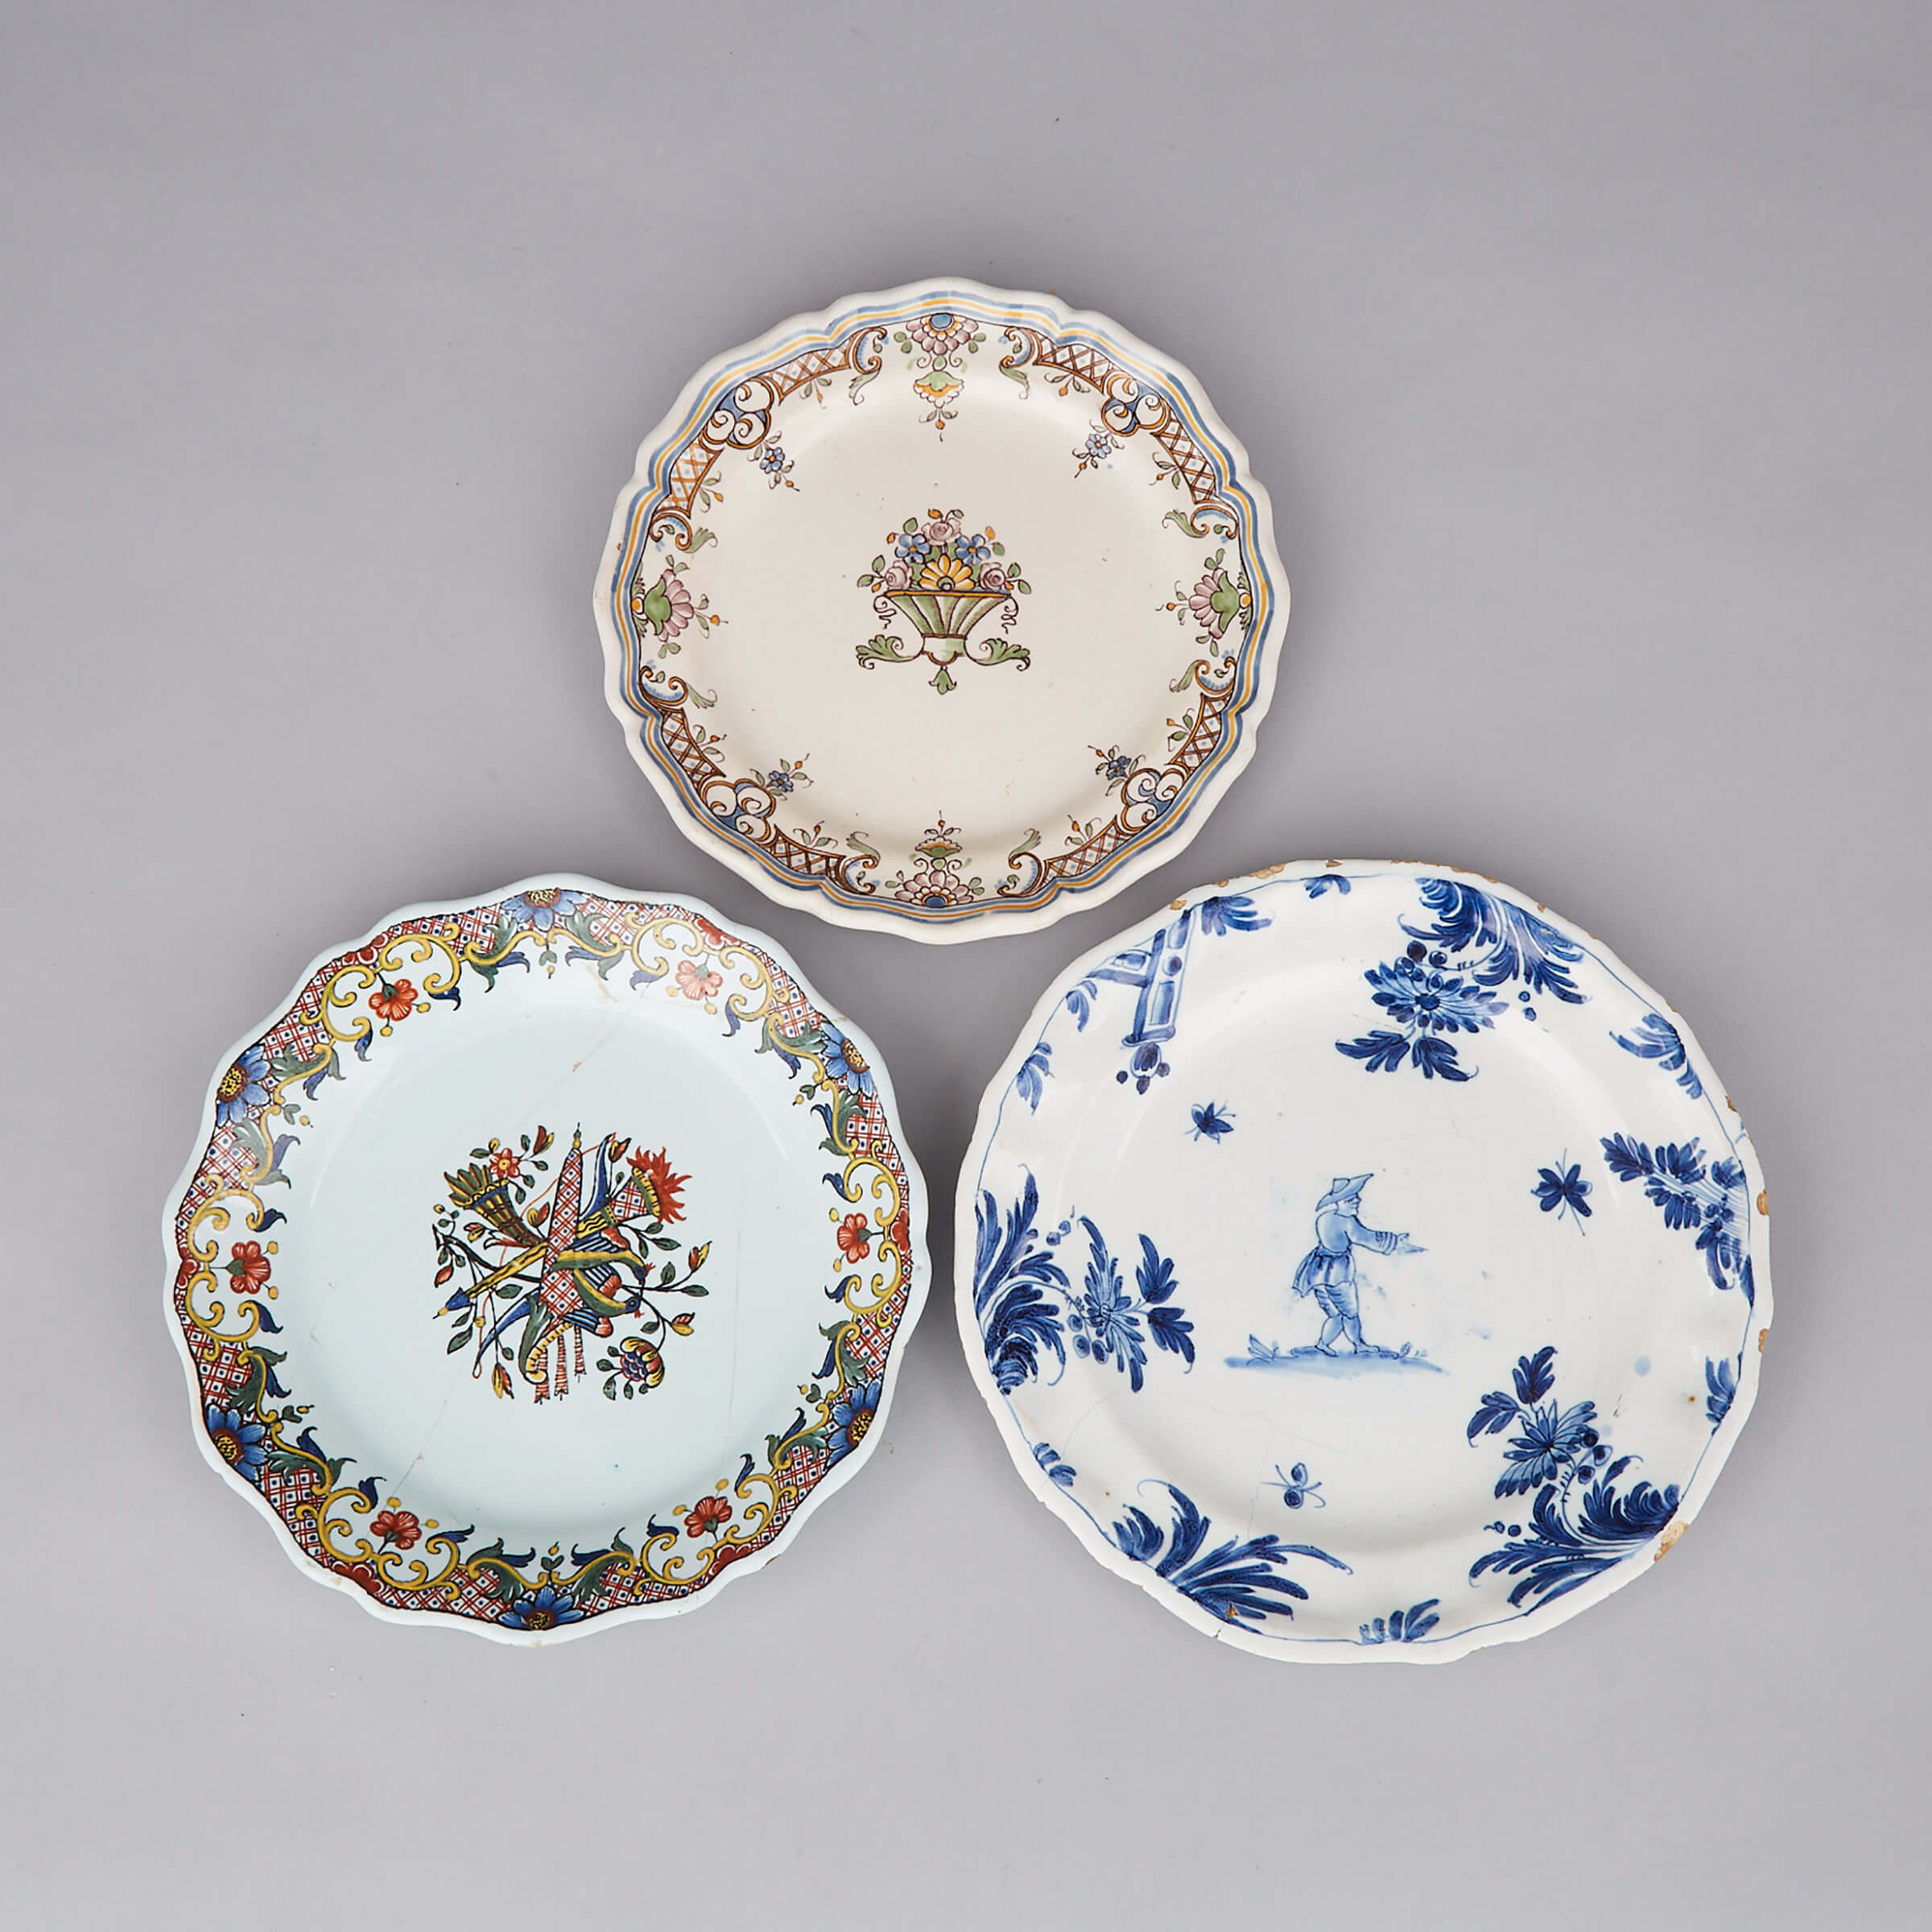 Two Bordeaux and Rouen Polychrome Decorated Faience Plates and a Blue Painted Chinoiserie Plate, Madeleine Héraud & Louis Leroy, 18th century